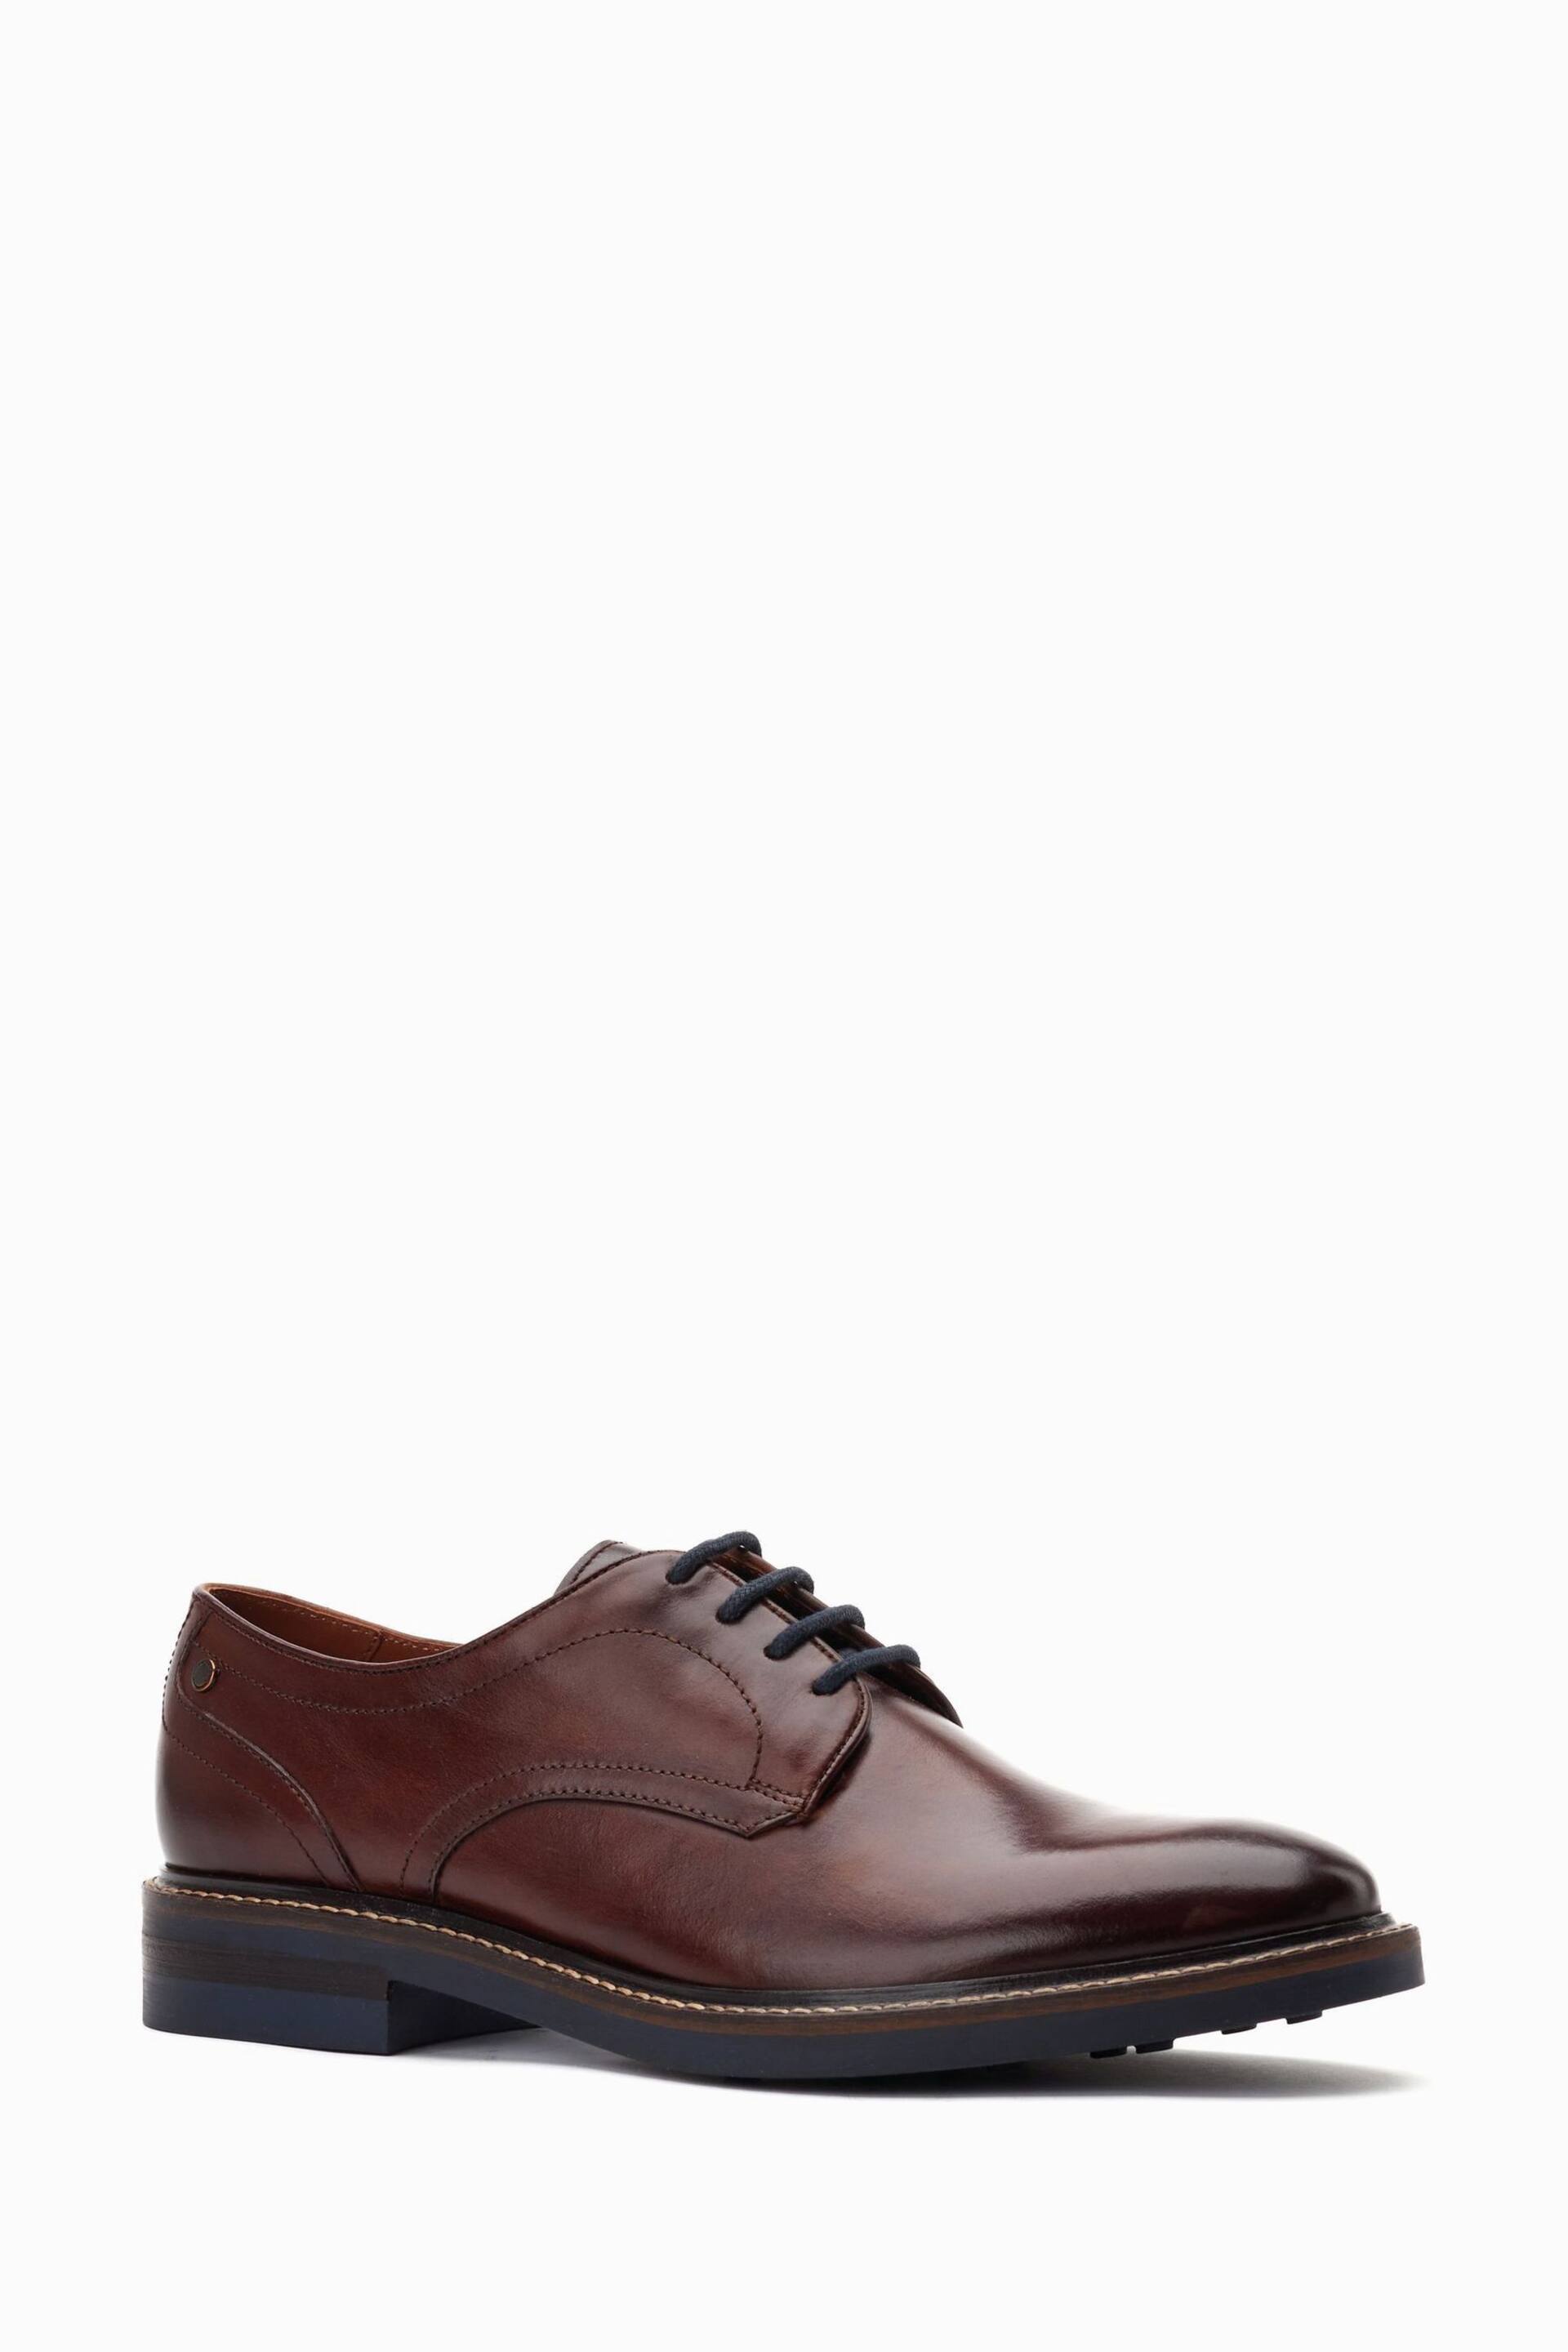 Base London Mawley Lace-Up Derby Shoes - Image 3 of 6